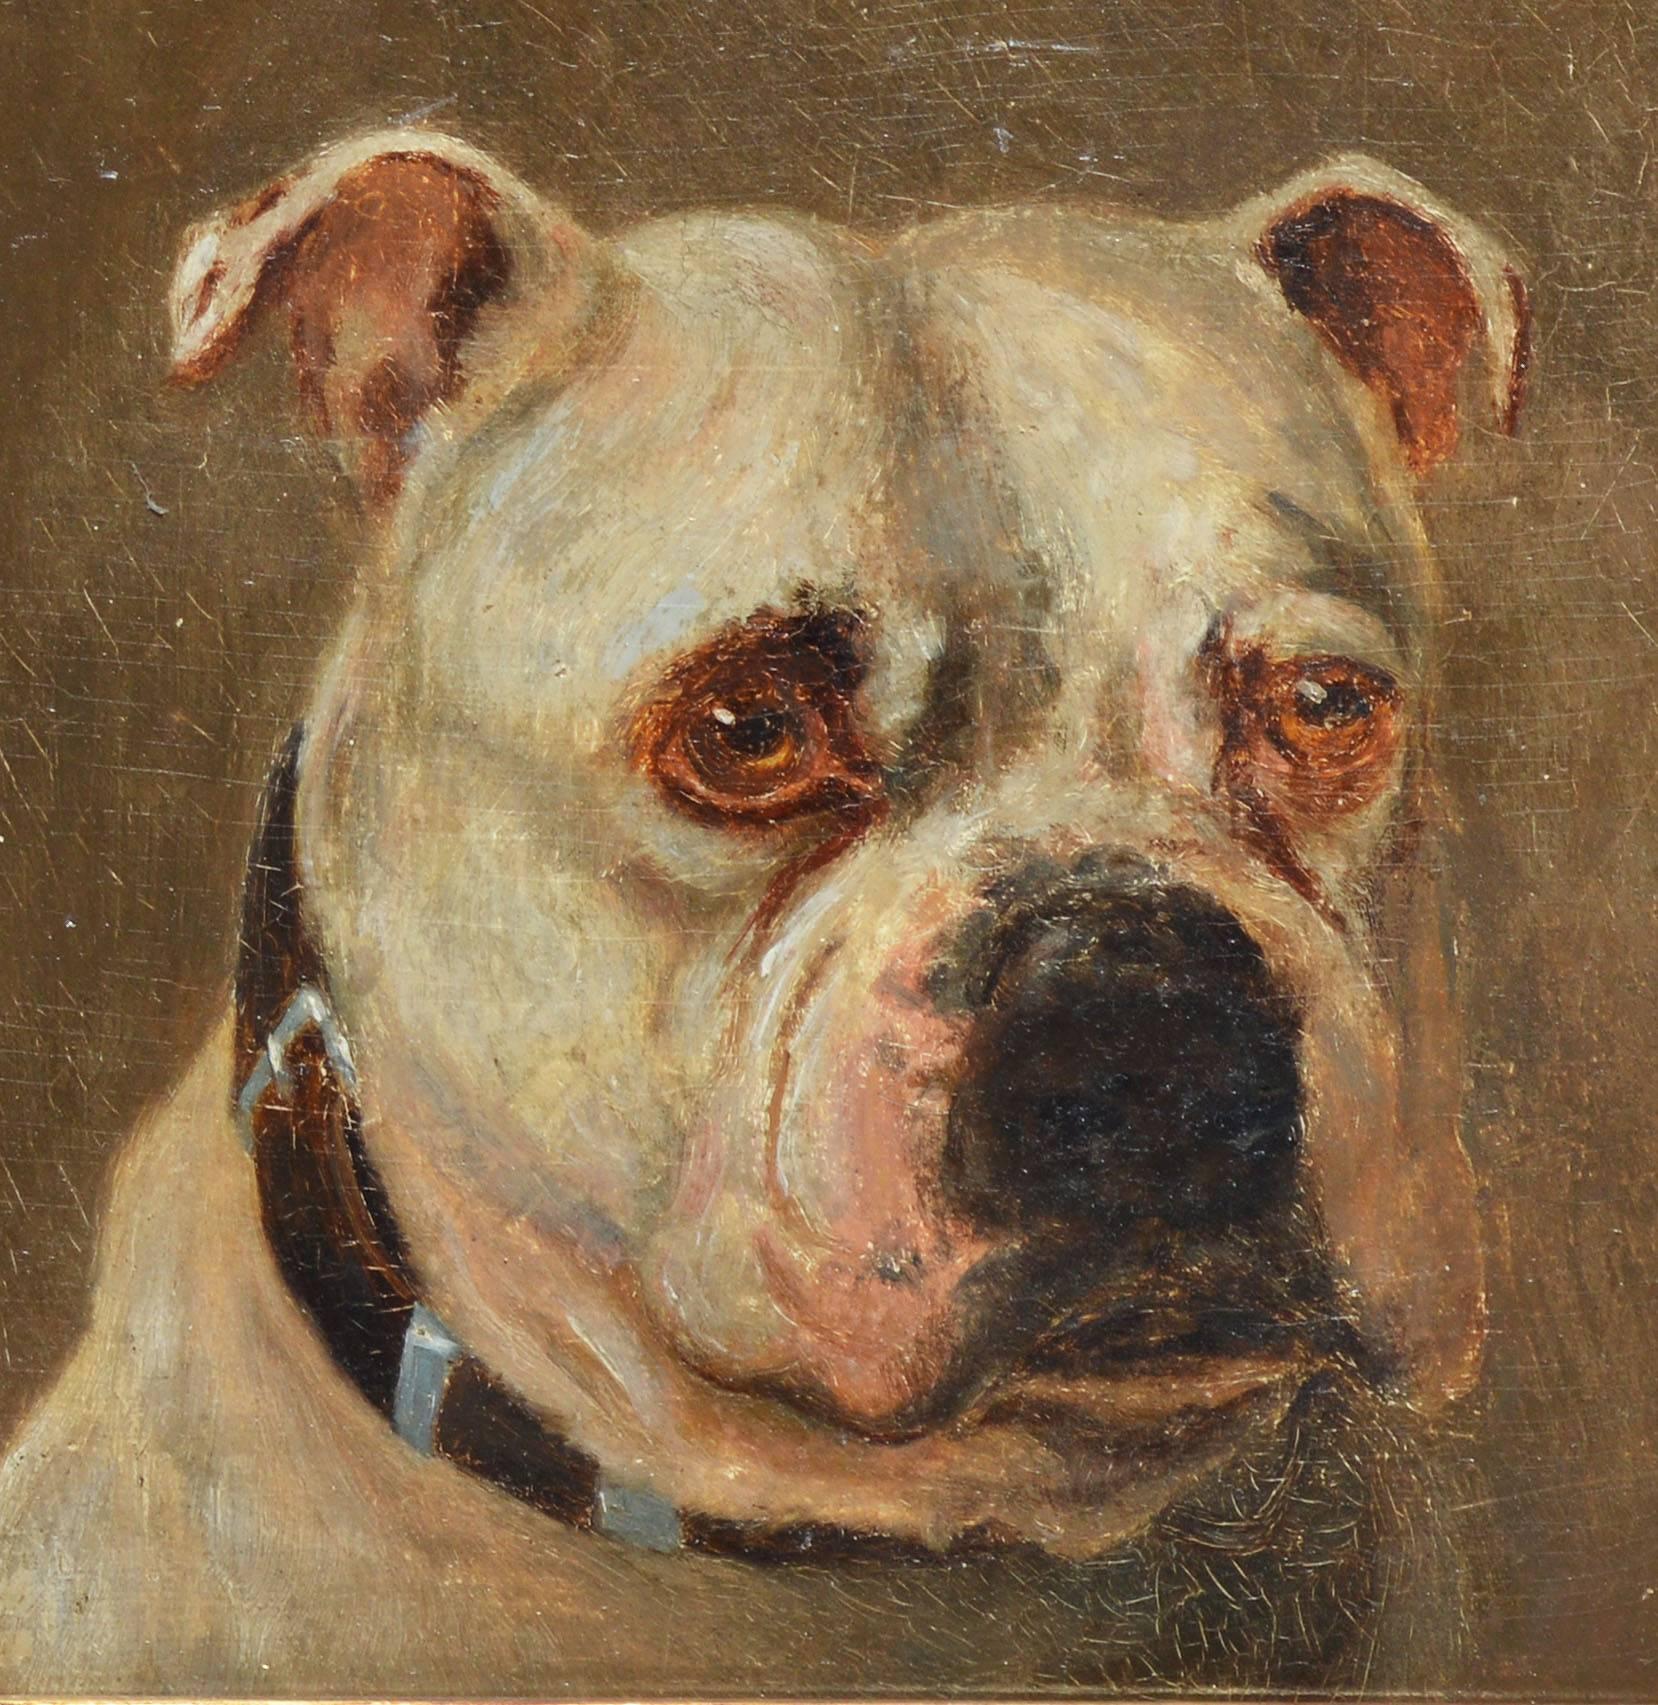 19th Century American School Portrait of a Dog - Brown Animal Painting by Unknown